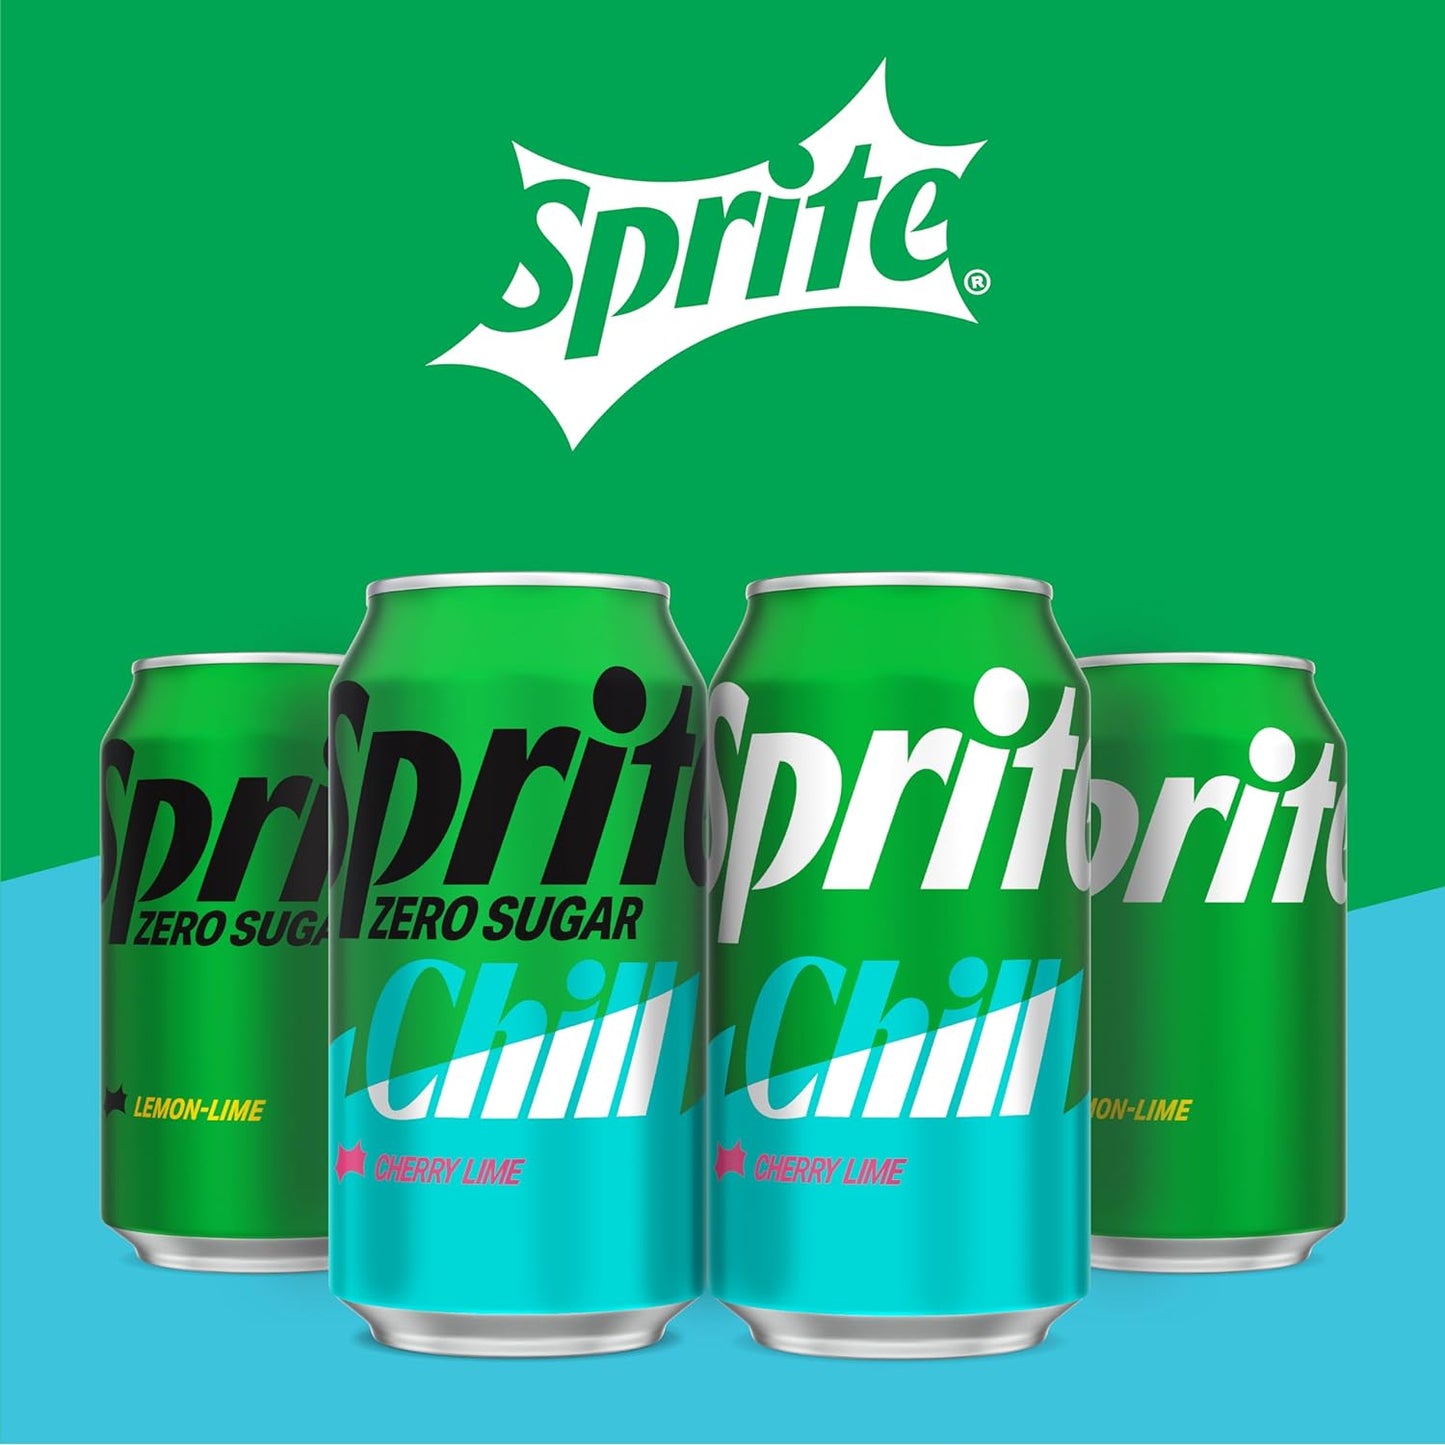 Sprite Chill Cherry Lime 12oz 12pk - LIMITED EDITION - PRE ORDER